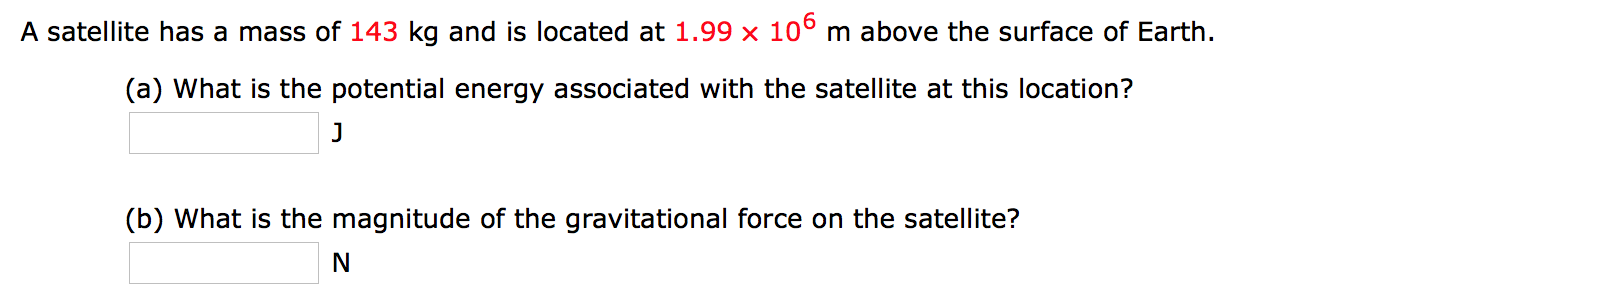 A satellite has a mass of 143 kg and is located at 1.99 x 10° m above the surface of Earth
(a) What is the potential energy associated with the satellite at this location?
J
(b) What is the magnitude of the gravitational force on the satellite?
N
